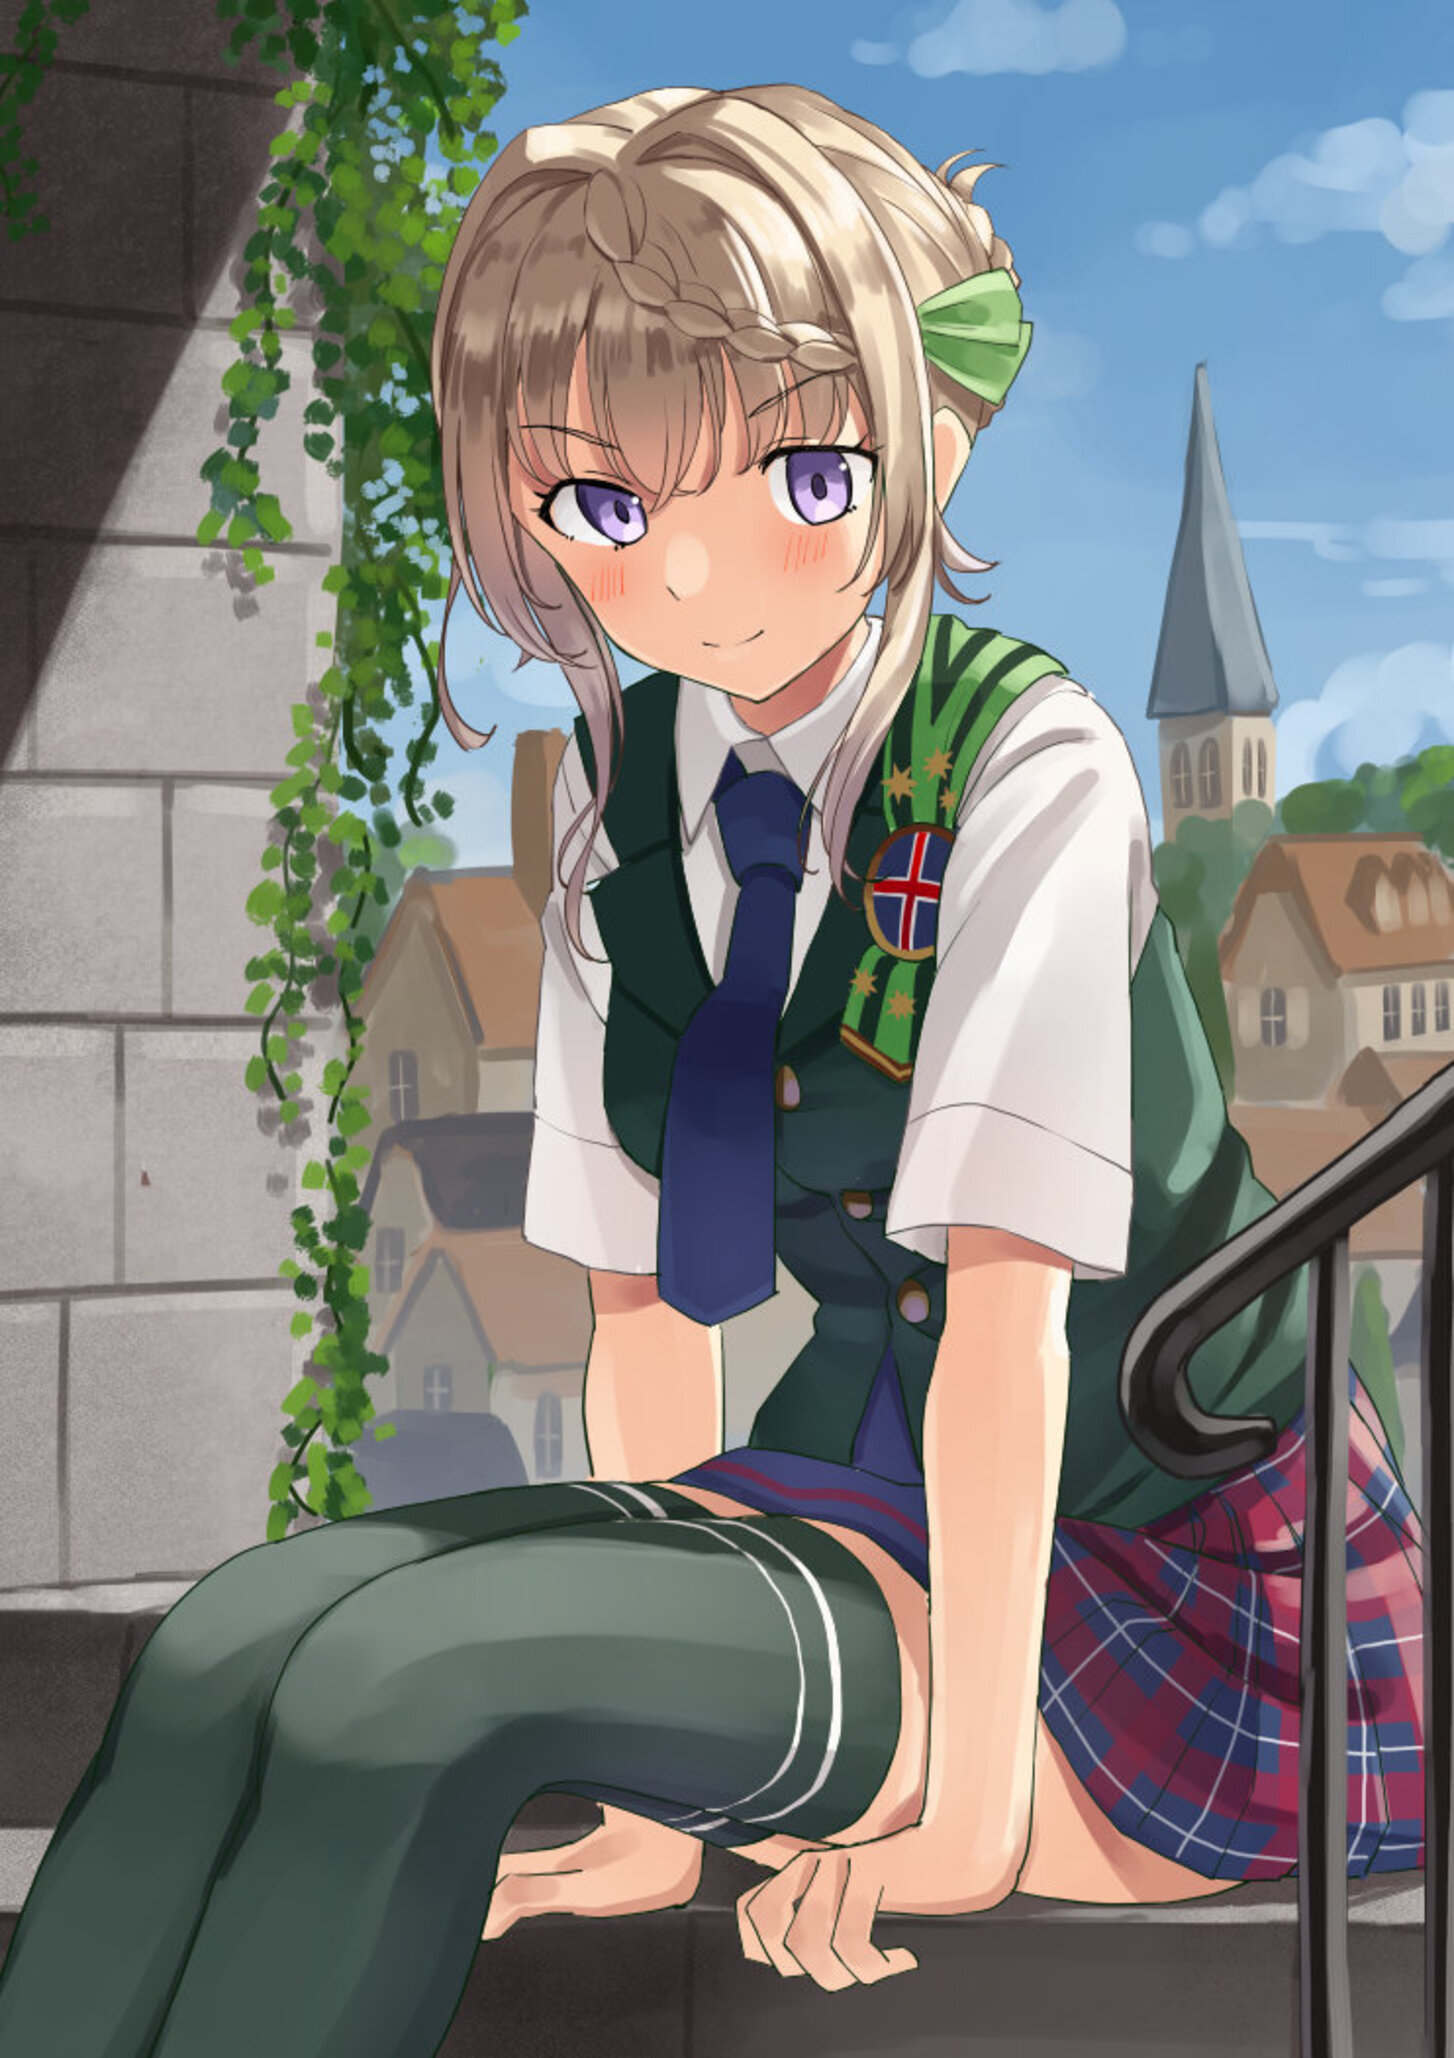 Anime 1454x2058 anime anime girls Kantai Collection Perth (KanColle) long hair blonde solo artwork digital art fan art stockings sitting women outdoors green stockings tie plaid skirt skirt purple eyes green clothing looking at viewer knees together